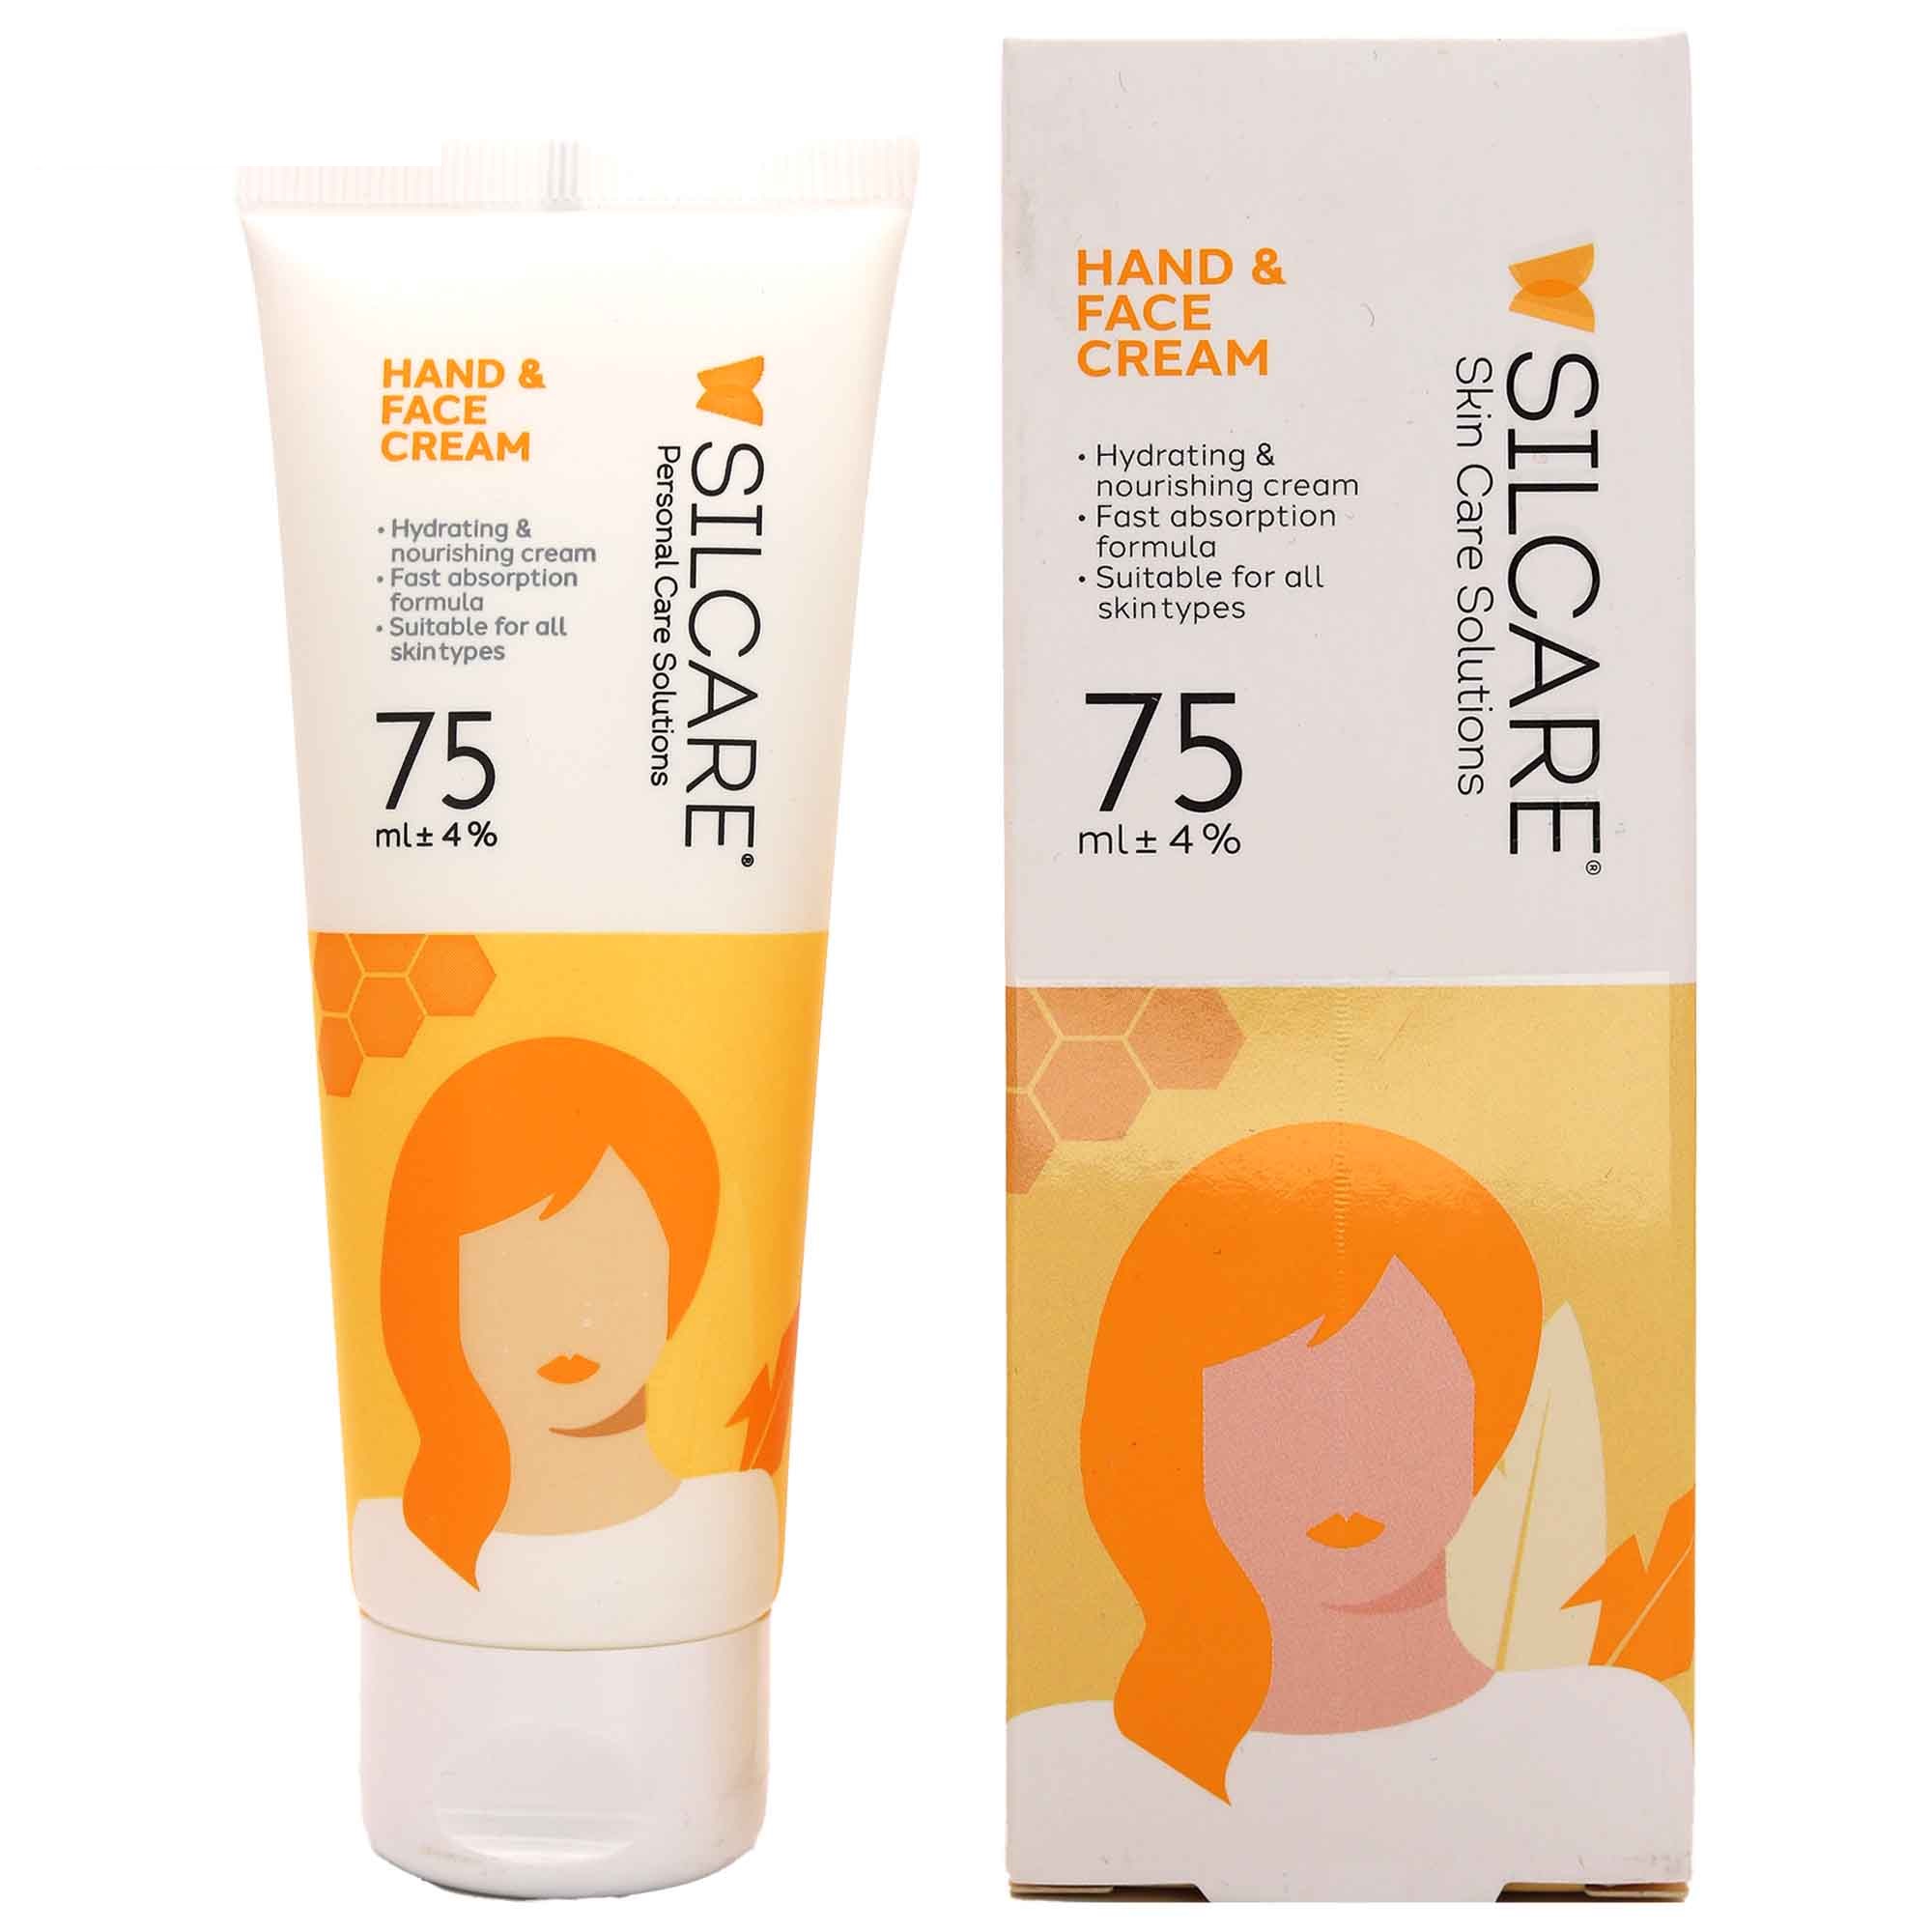 Hand and Facial Honey and Face Cream - Silcare